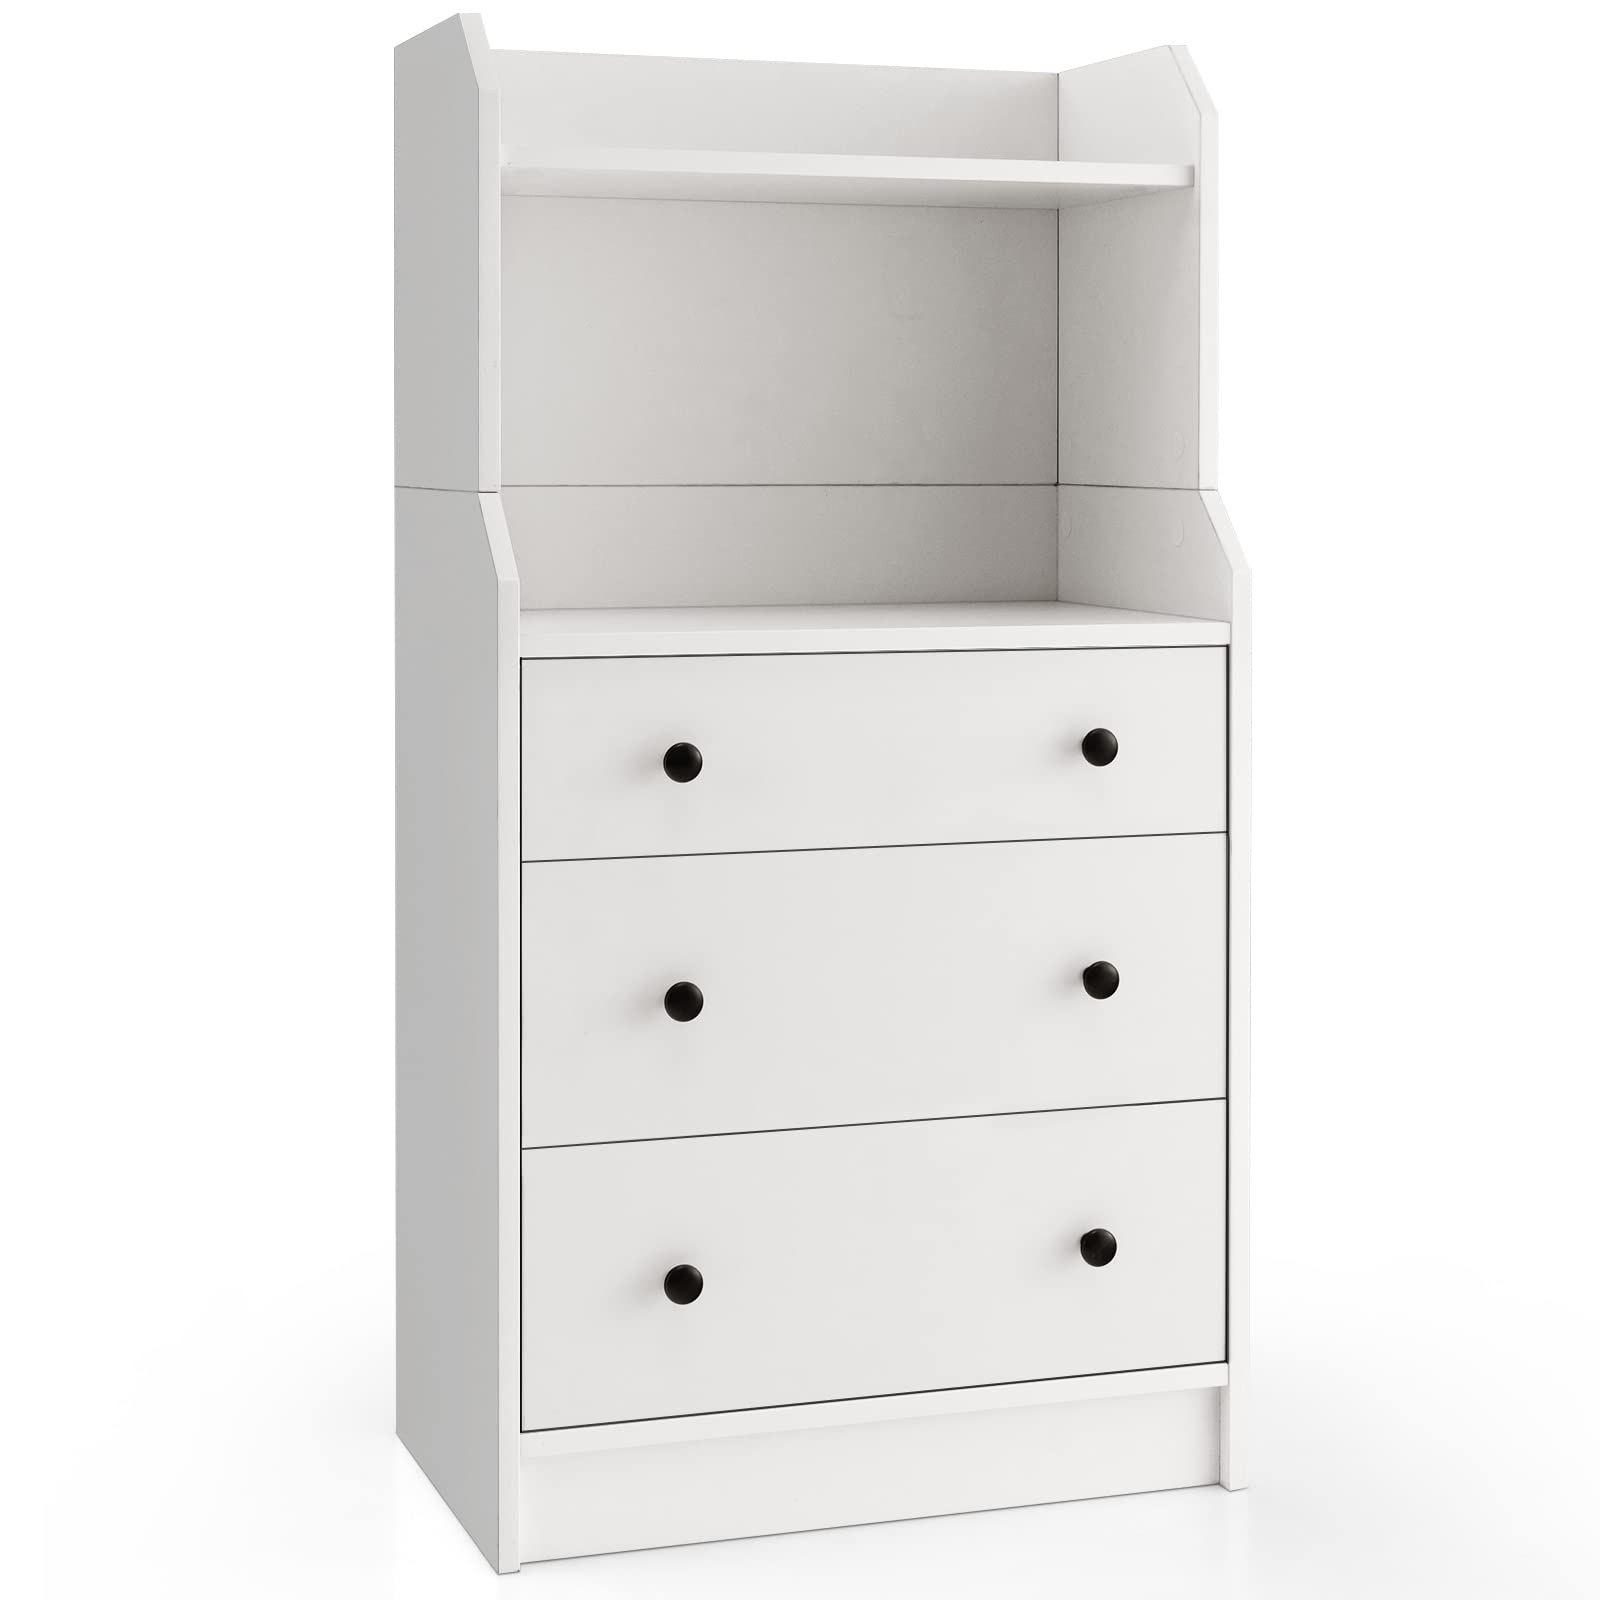 Giantex 3 Drawers Dresser for Bedroom - Modern Storage Dresser Chest of Drawers with 2 Shelves, 3 Pull-Out Drawers